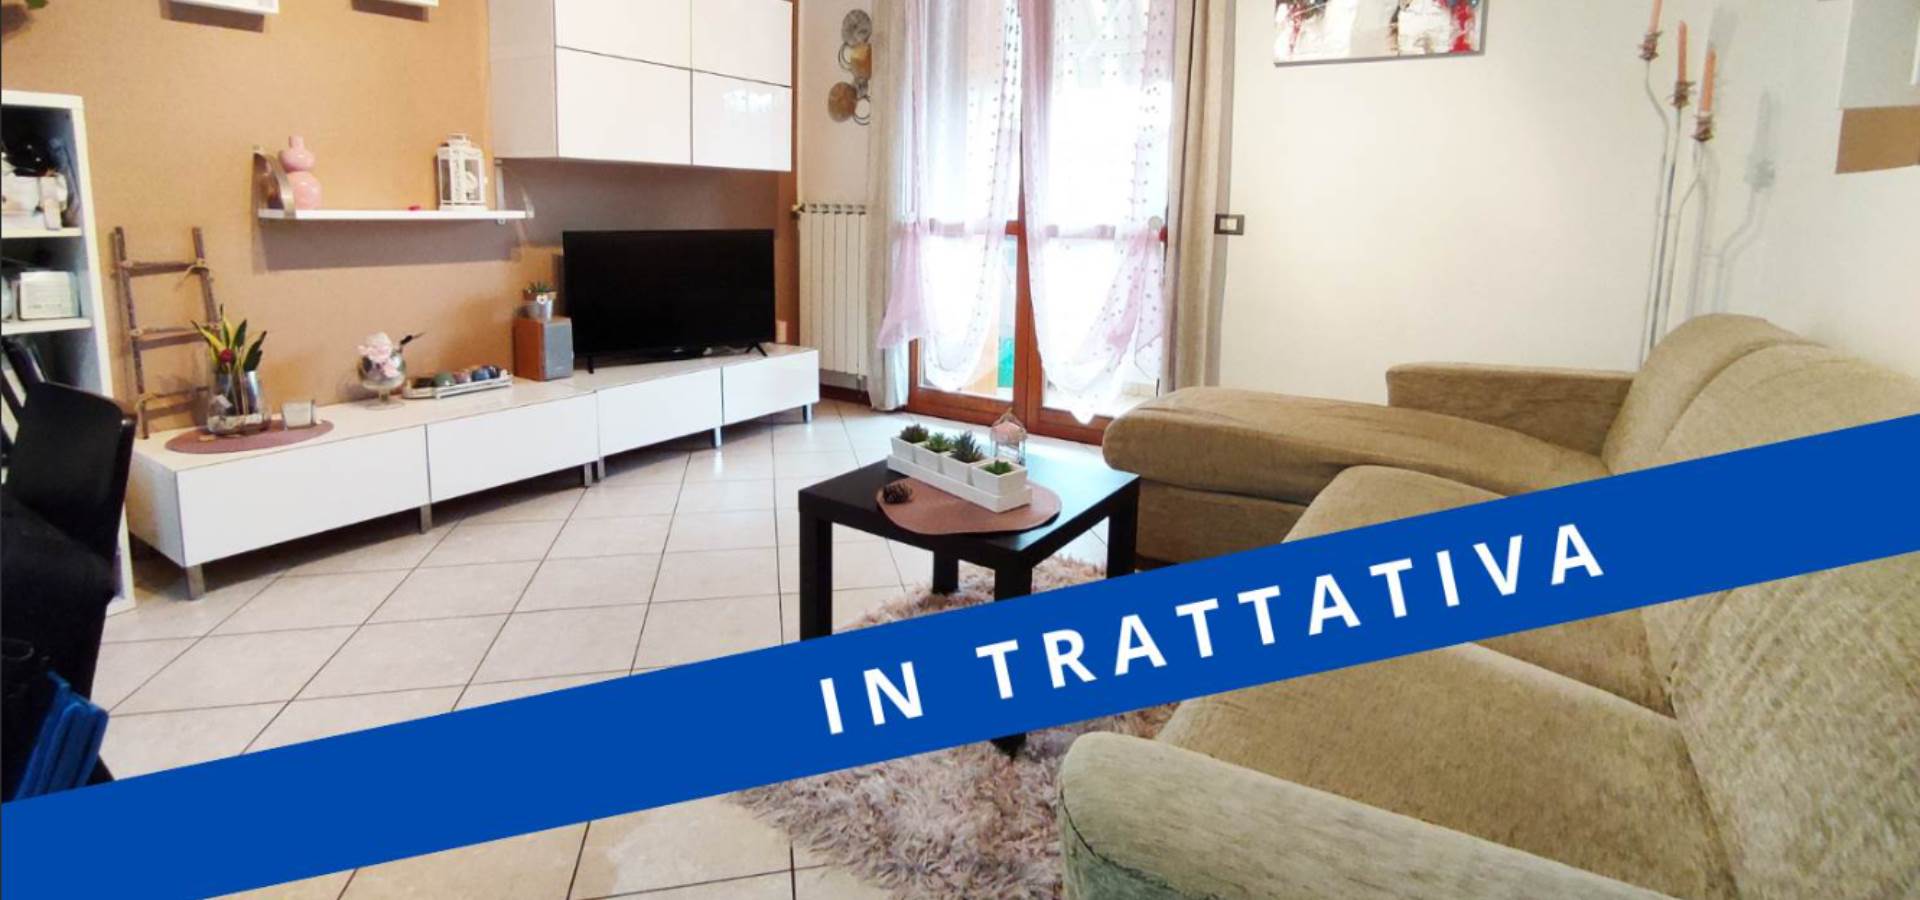 FOSSALTA DI PORTOGRUARO, Apartment for sale of 72 Sq. mt., Good condition, Heating Individual heating system, Energetic class: C, placed at 1° on 1, composed by: 3 Rooms, Kitchenette, , 2 Bedrooms, 1 